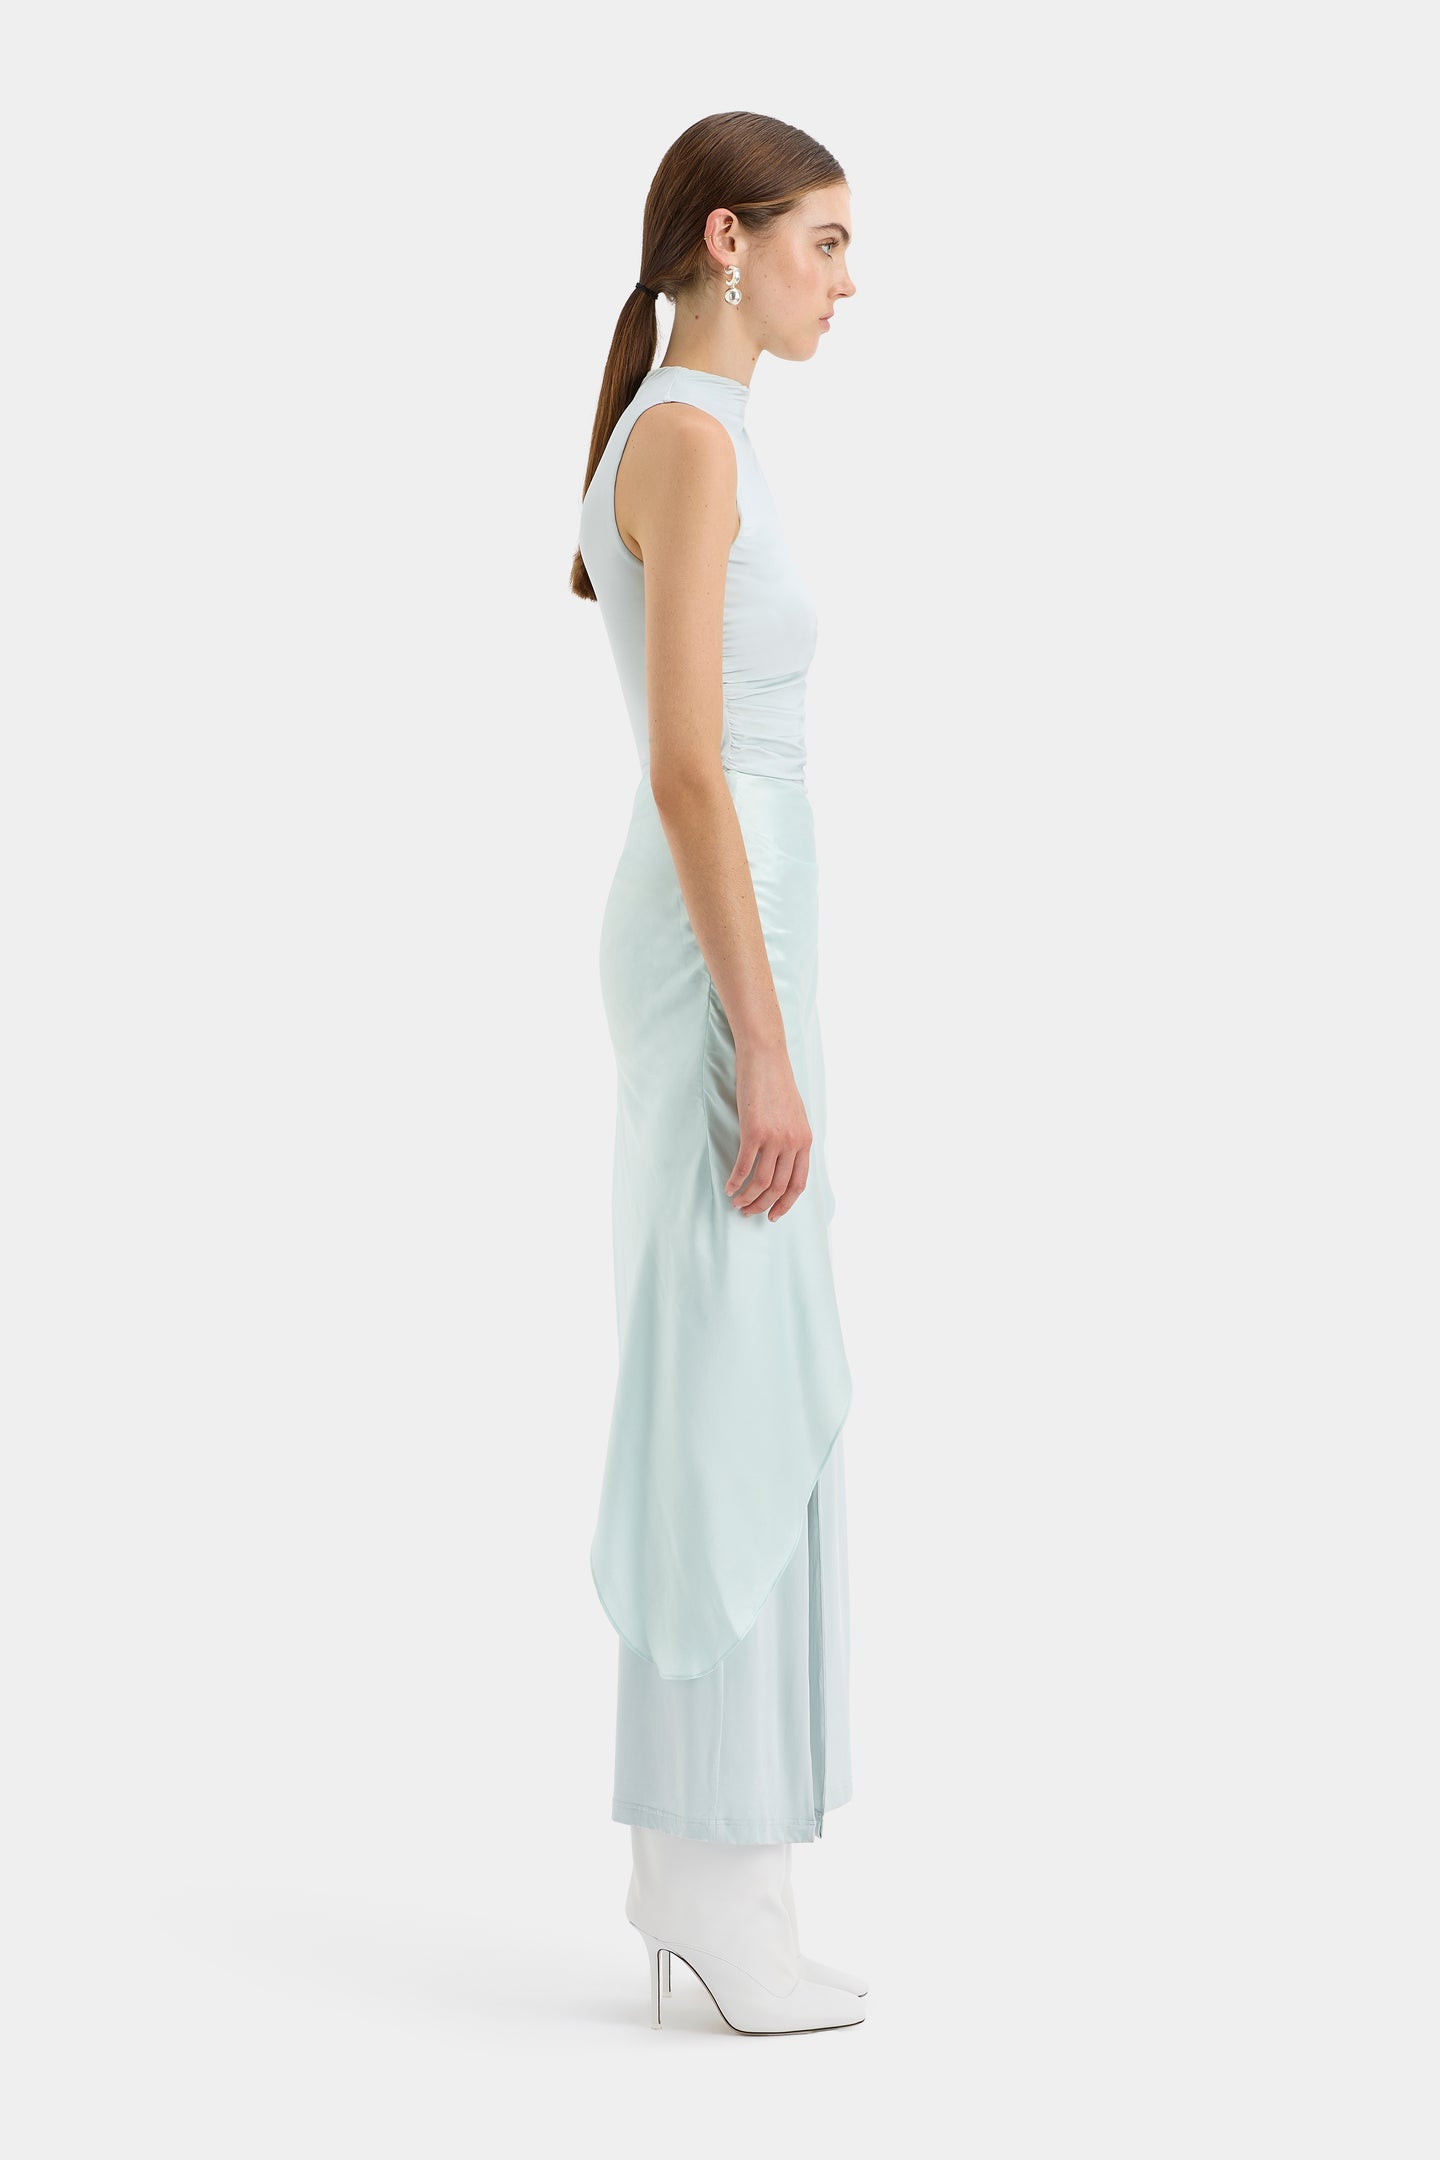 SIR the label Alessia Draped Skirt ICE BLUE